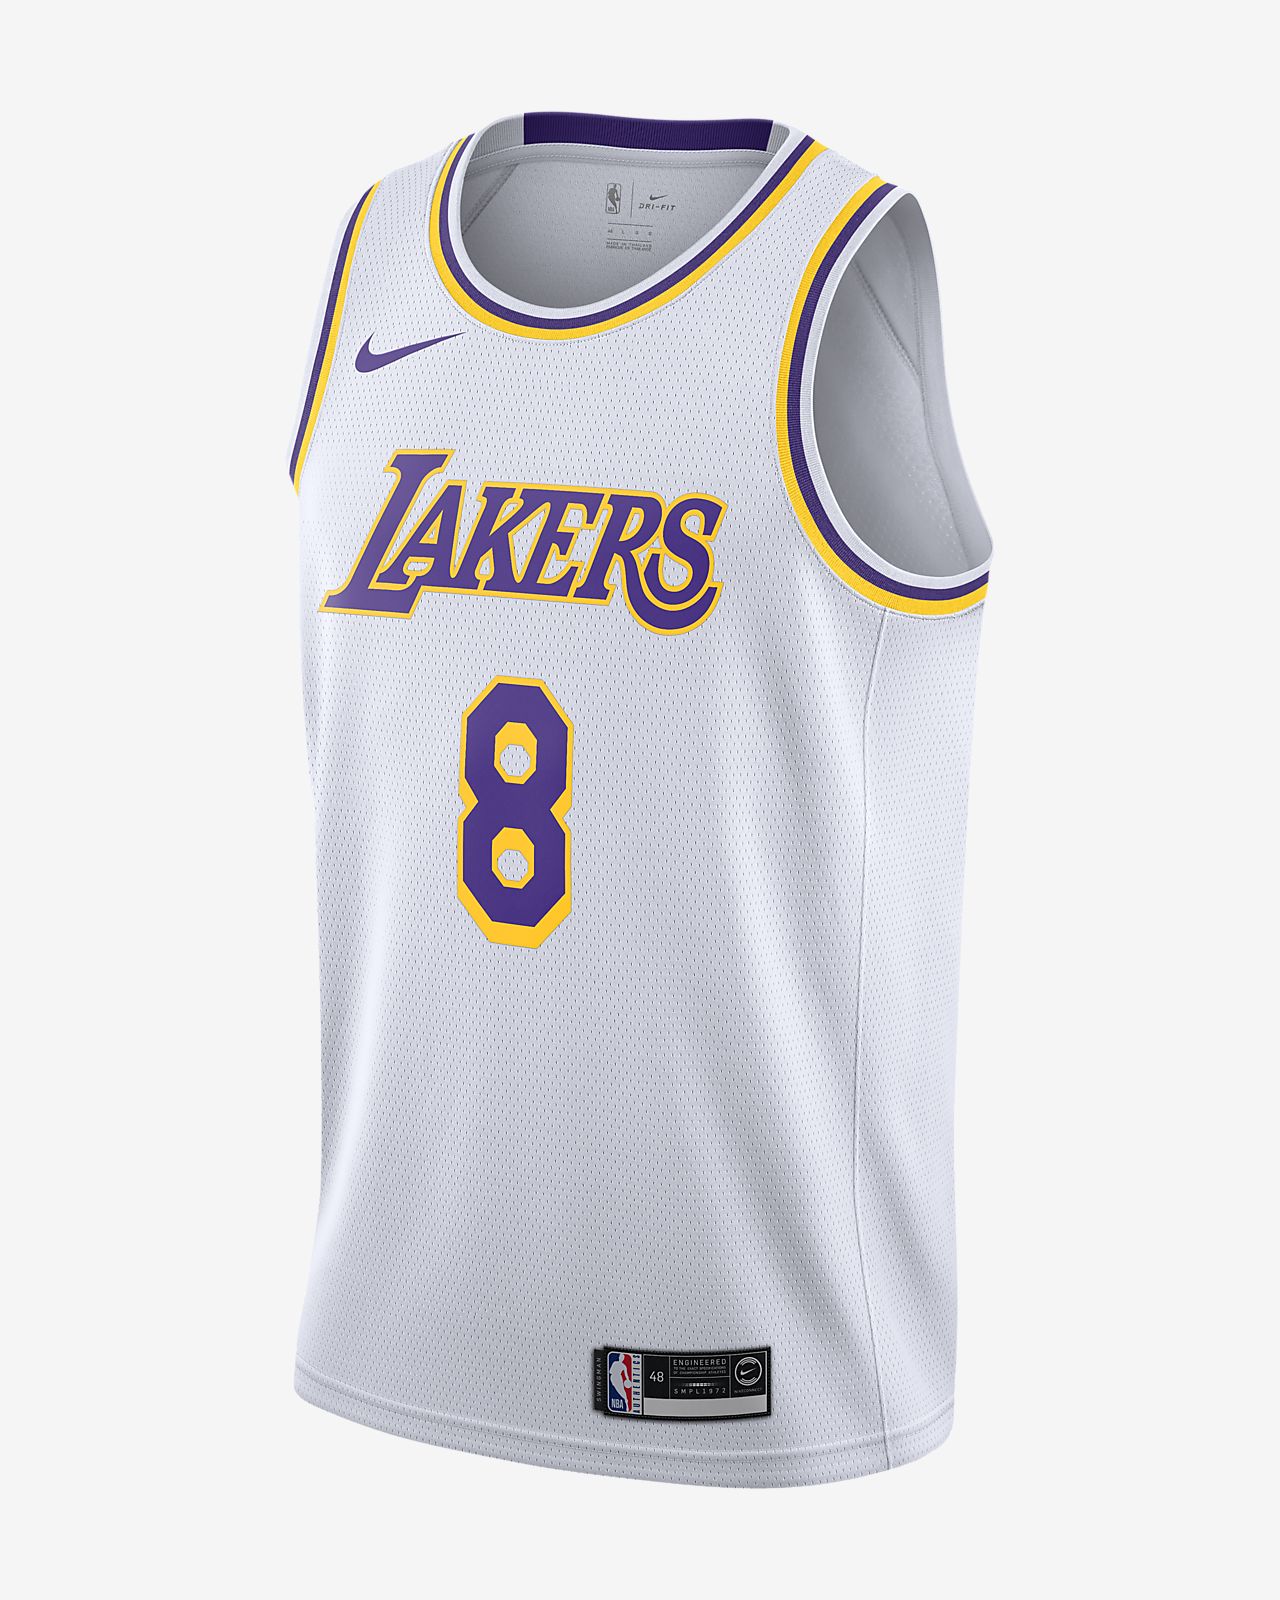 how much is a kobe bryant jersey